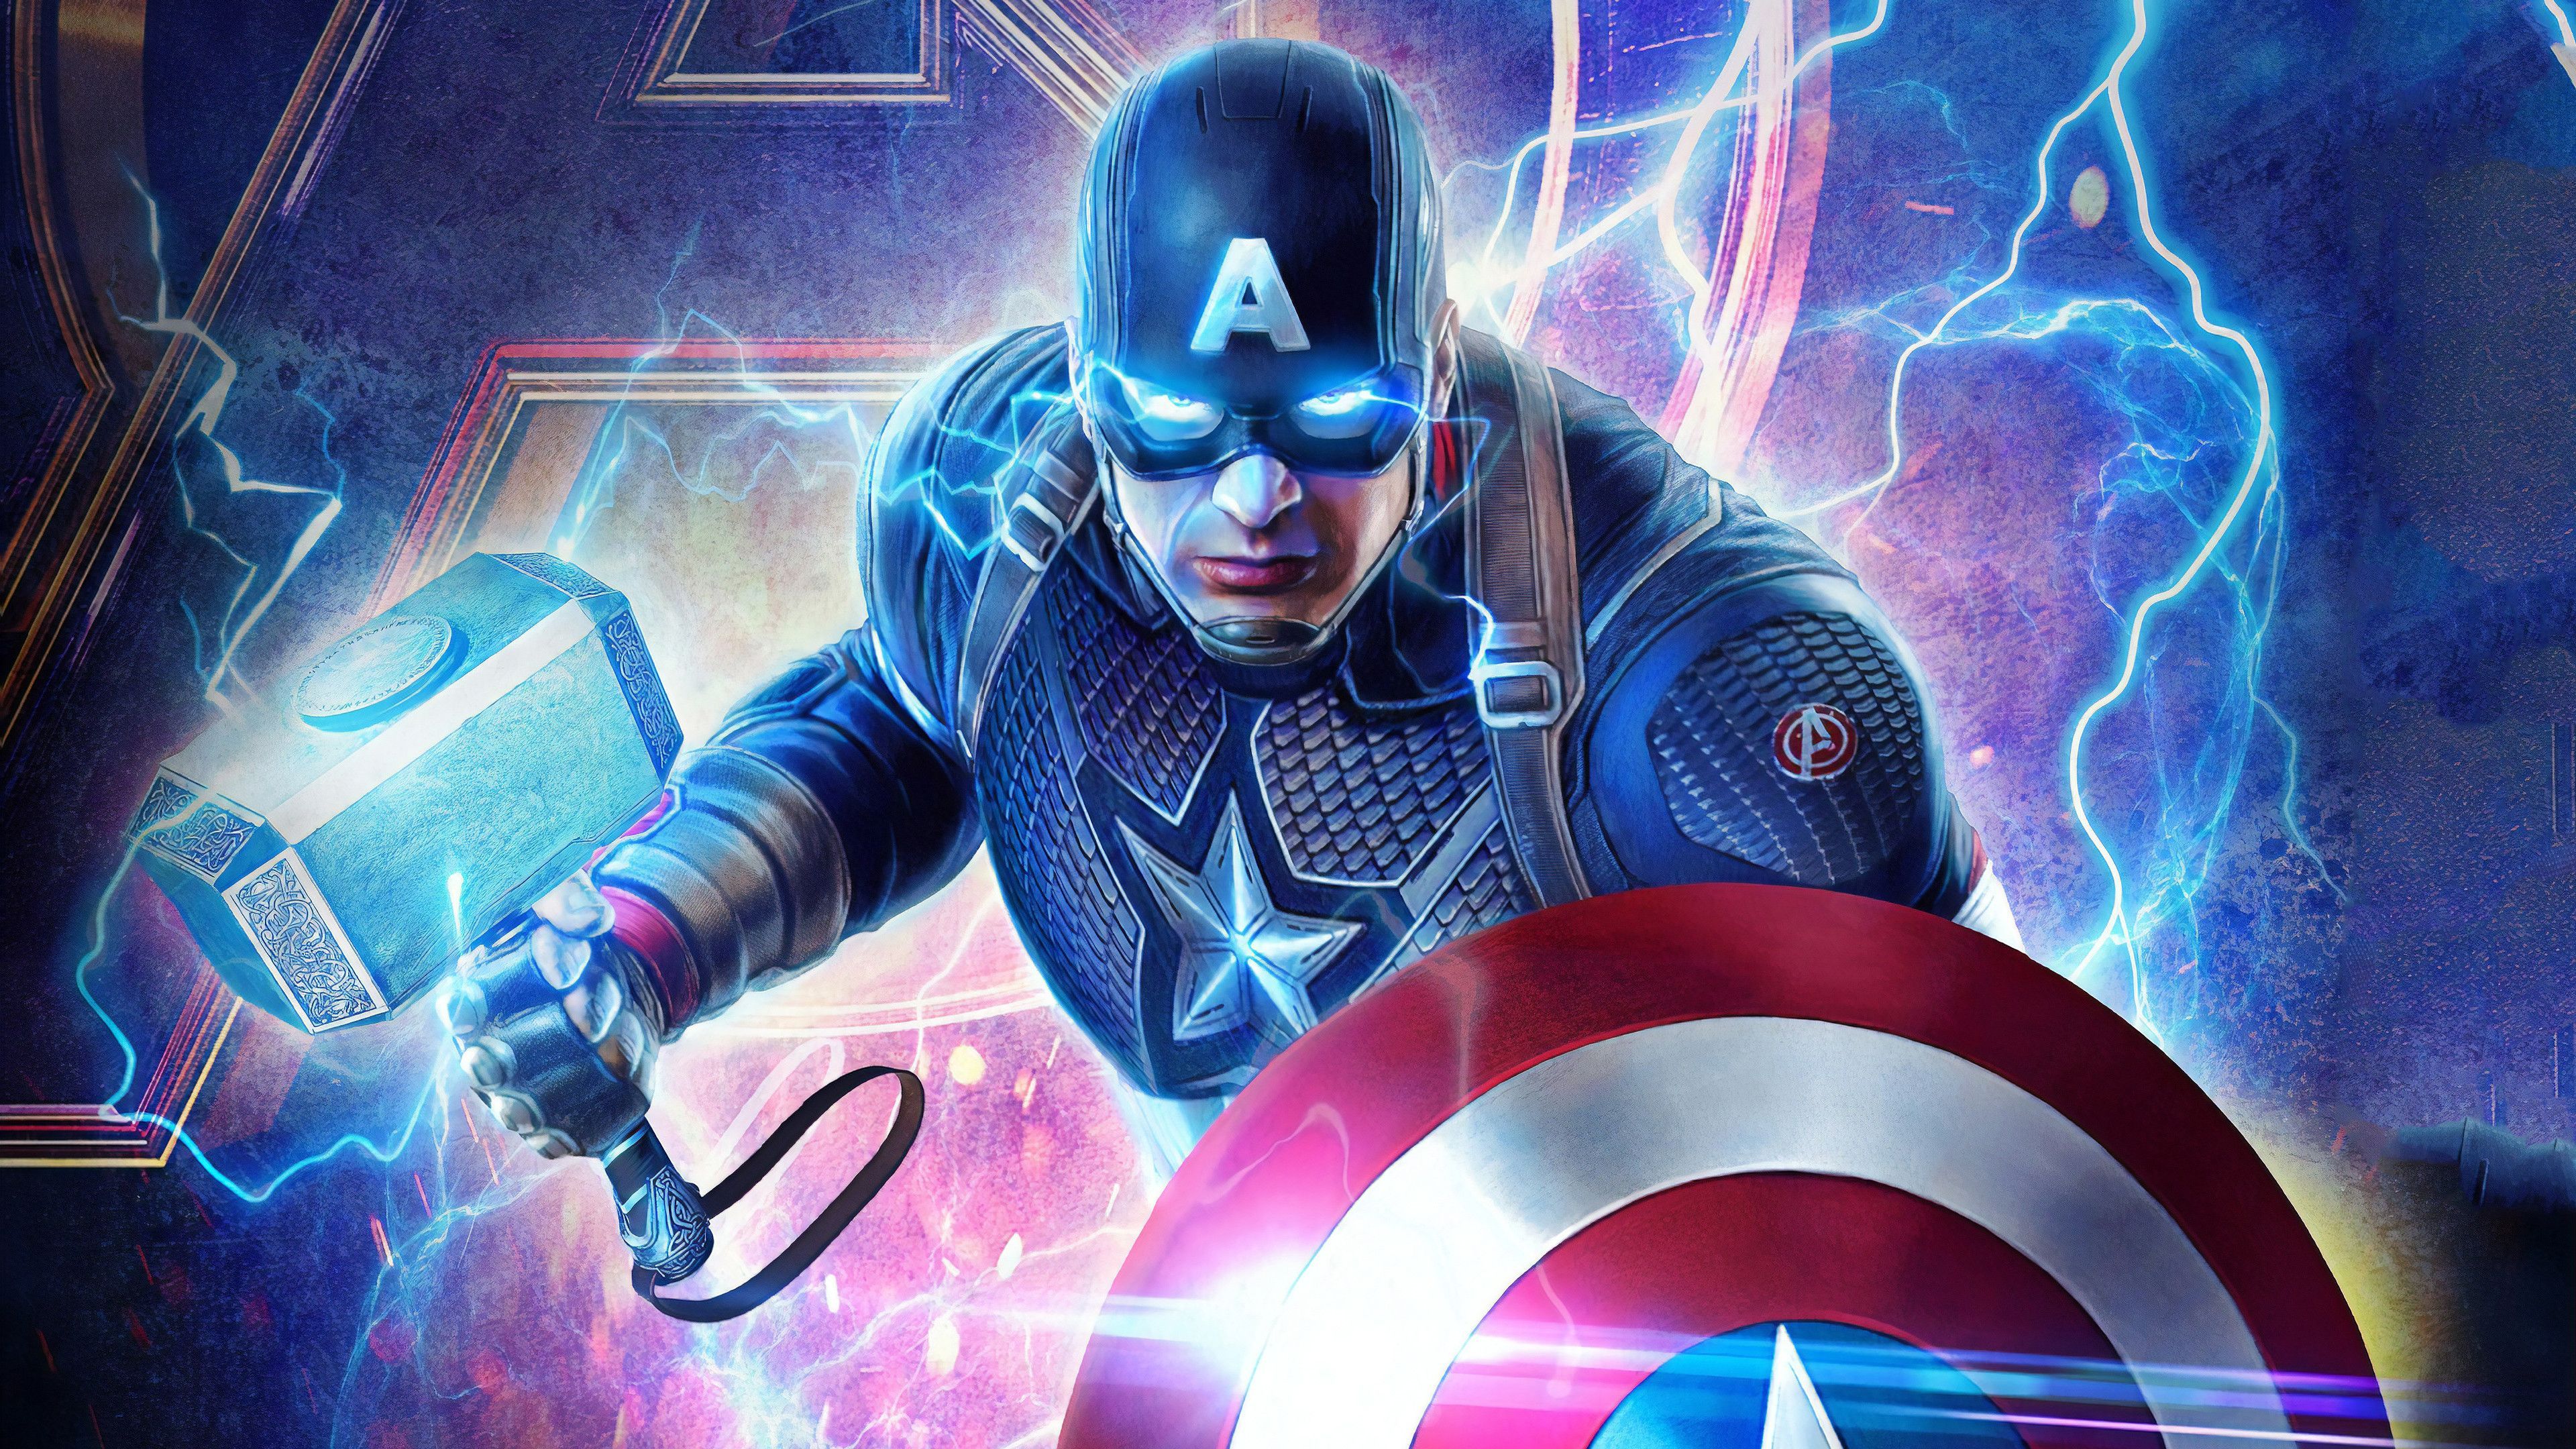 Captain America With Hammer Wallpapers Wallpaper Cave